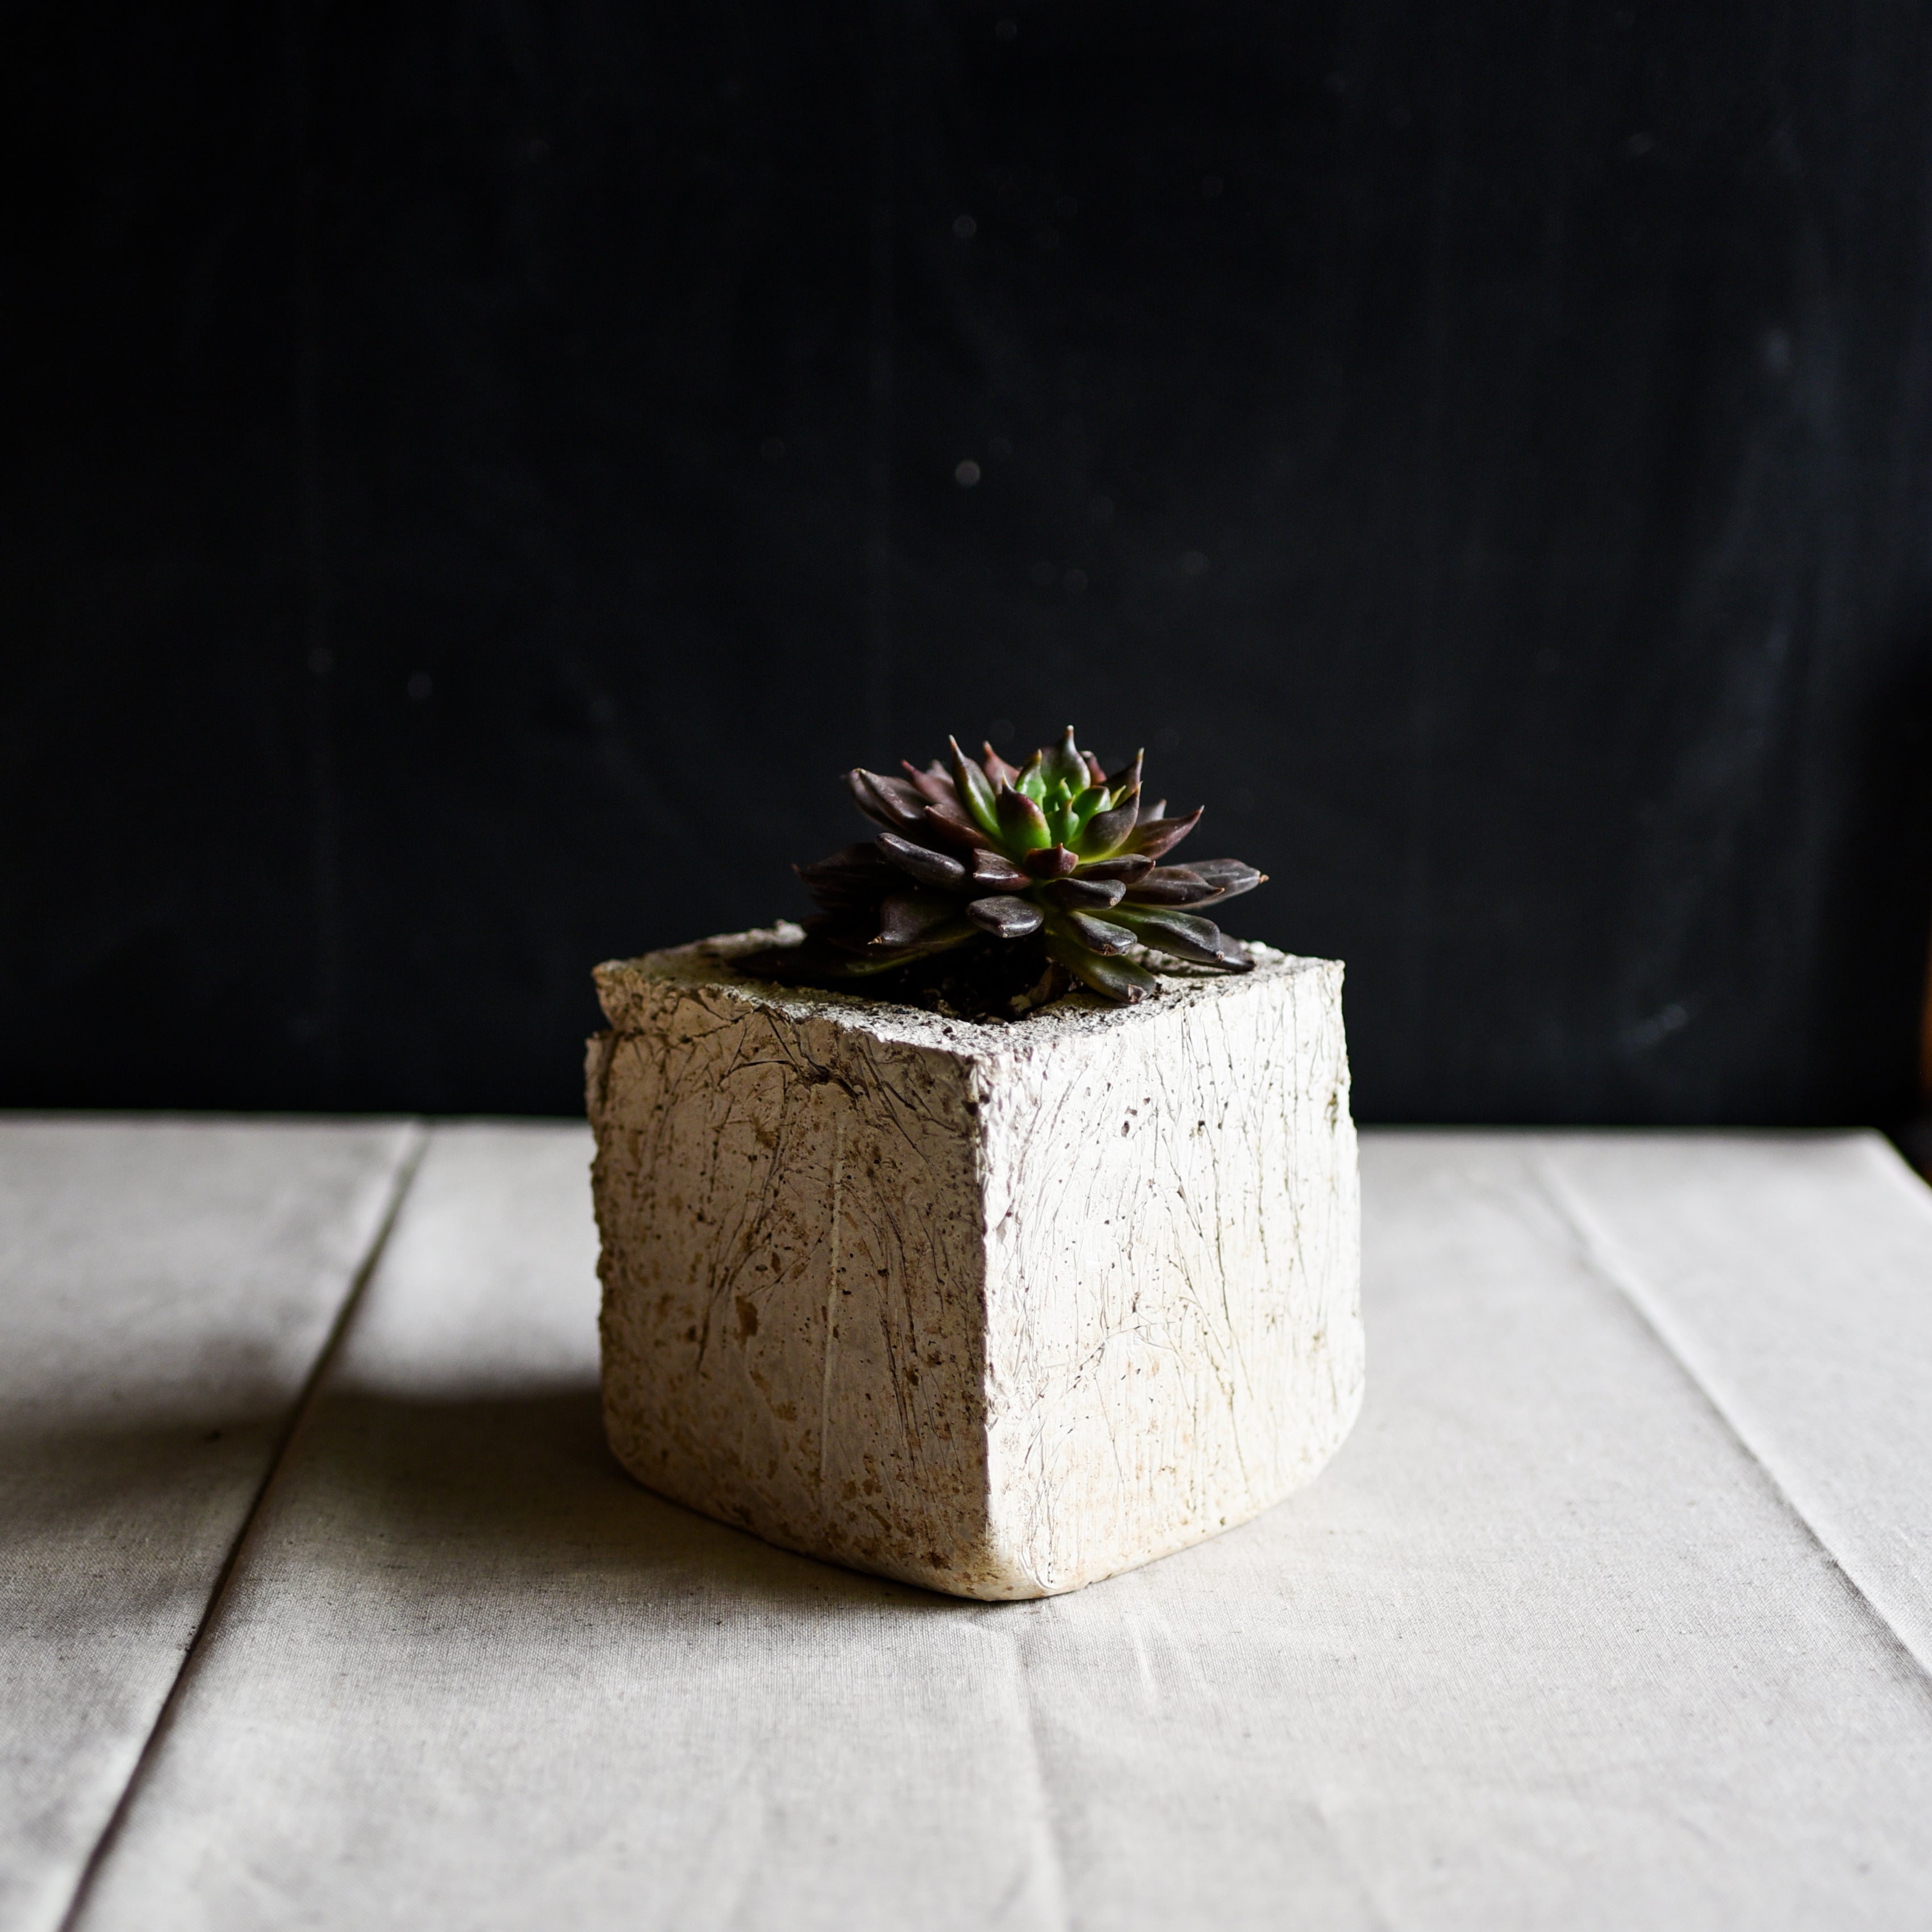 Made from our handmade Pozzola pottery. This modern bespoke living tablescape comes in a bone color and is planted with a seasonal variety of echeveria succulents. One organically shaped square, fits in the palm of both hands and has the feel and texture of washed stone but is ultra light weight. With locally sourced drought tolerant succulents, this planter makes it easy to create a sustainable garden inside and out.